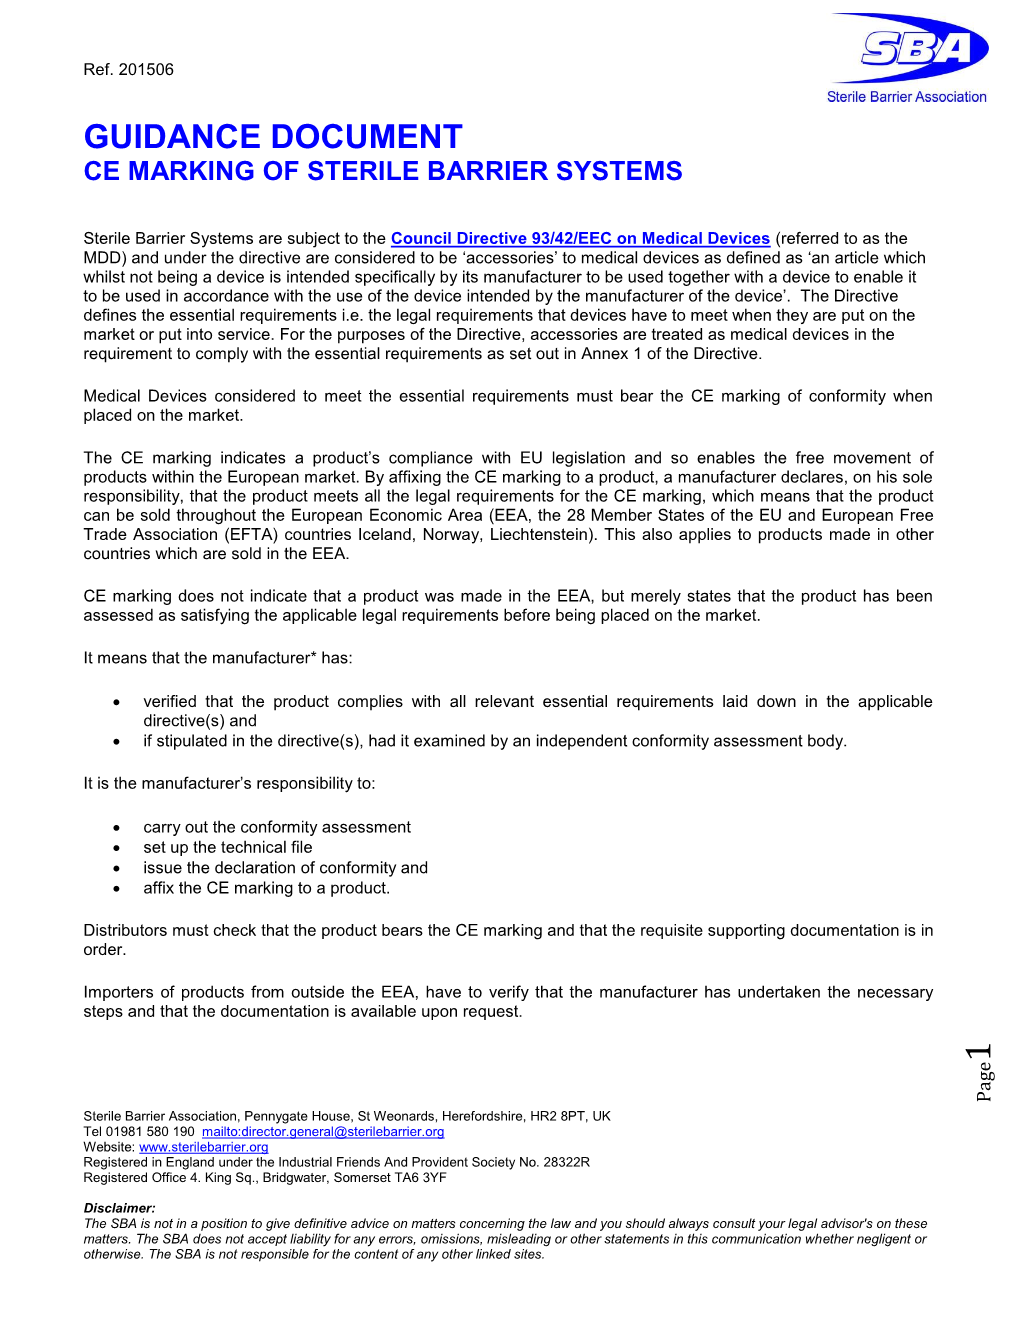 Guidance Document Ce Marking of Sterile Barrier Systems